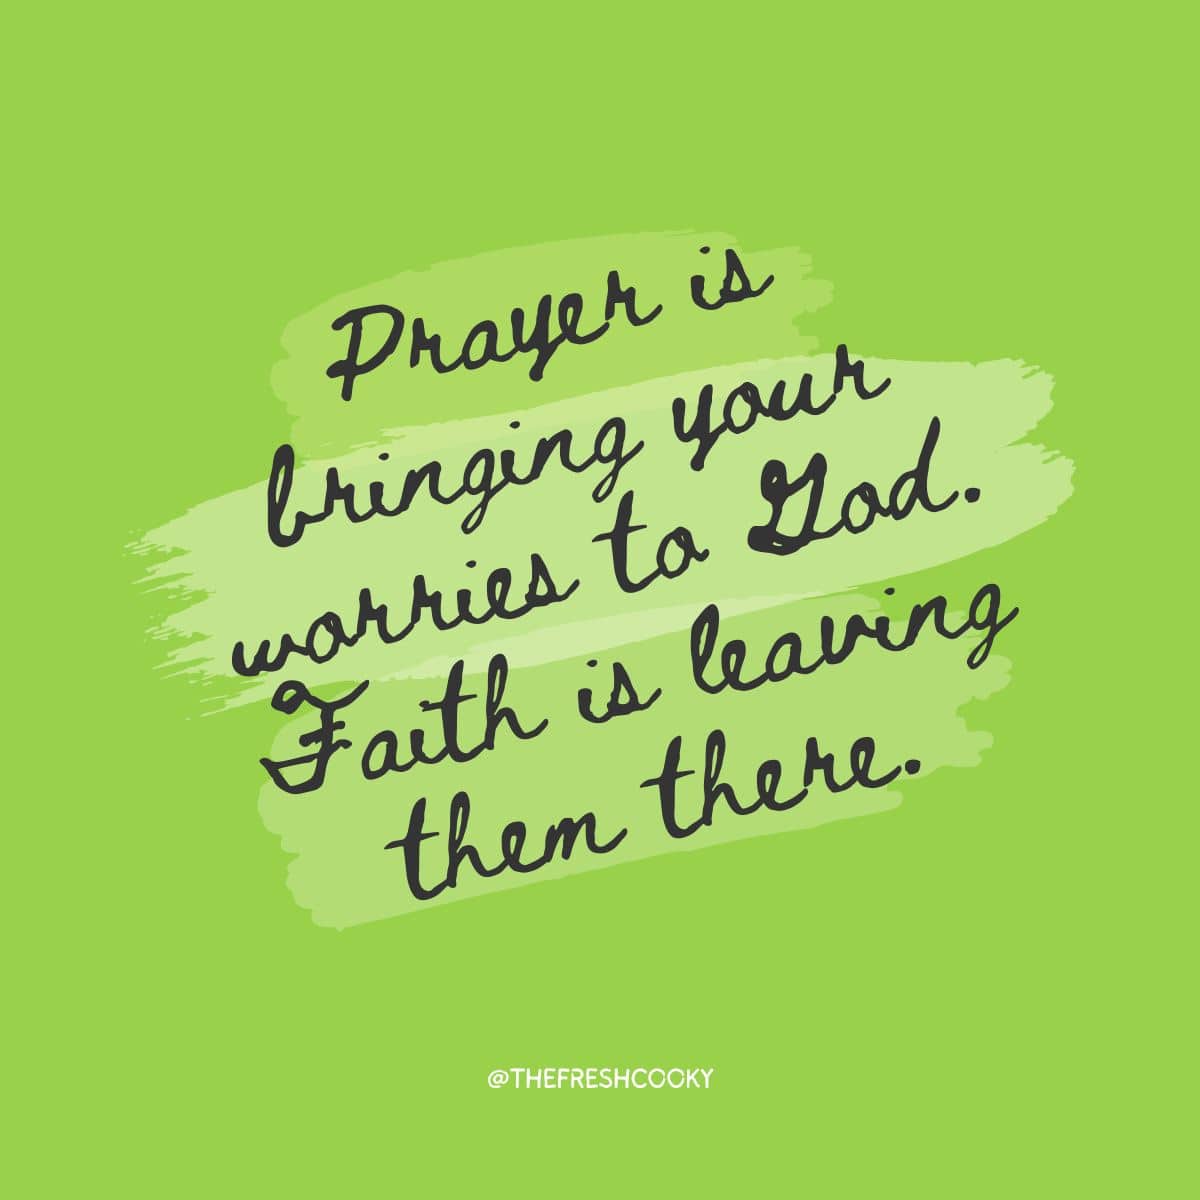 Prayer is bringing your worries to God. Faith is leaving them there.